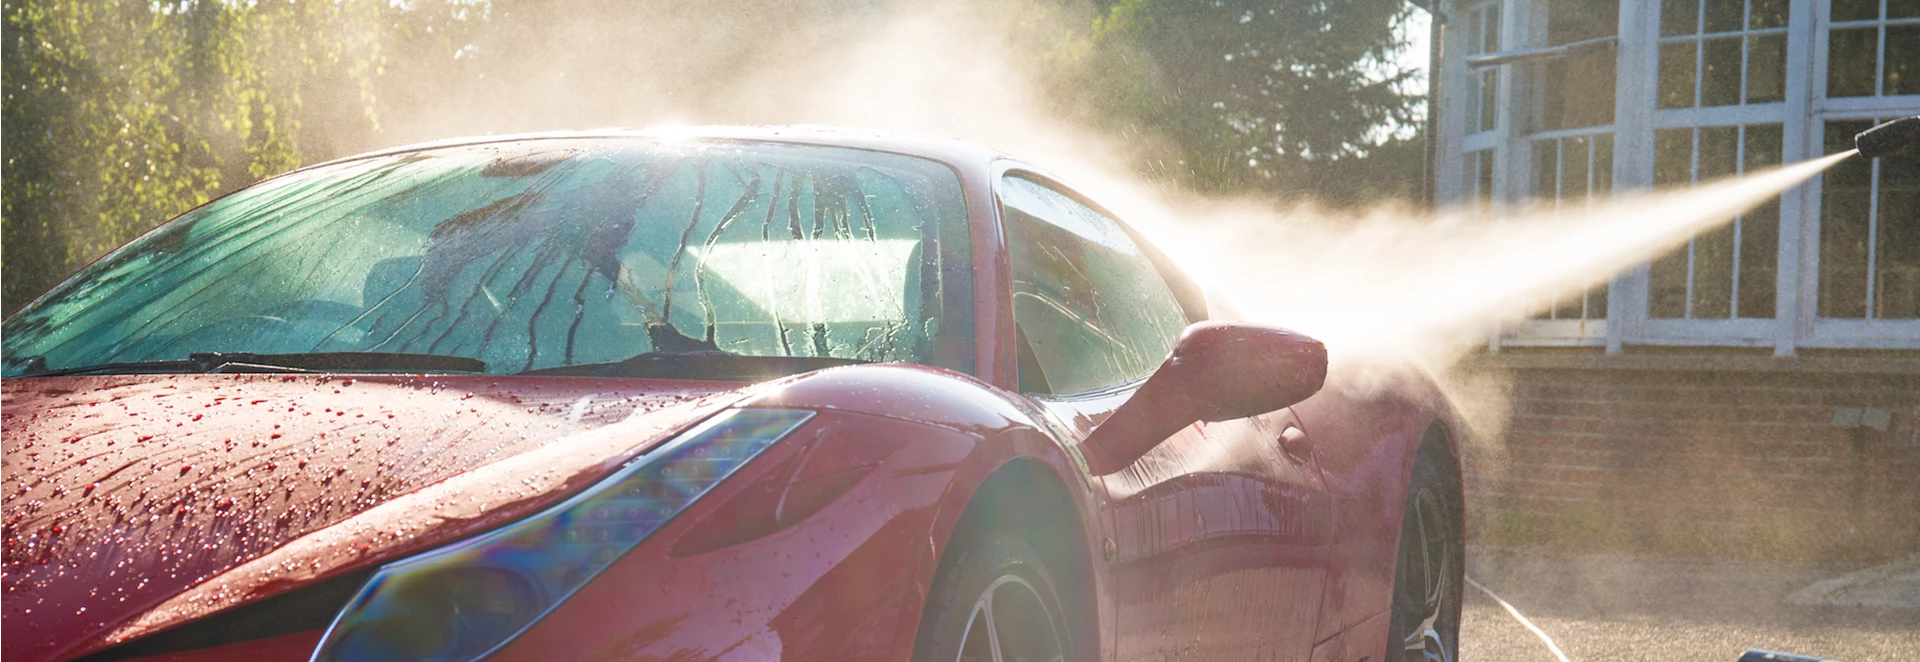 Are you allowed to wash your car during the hosepipe ban?